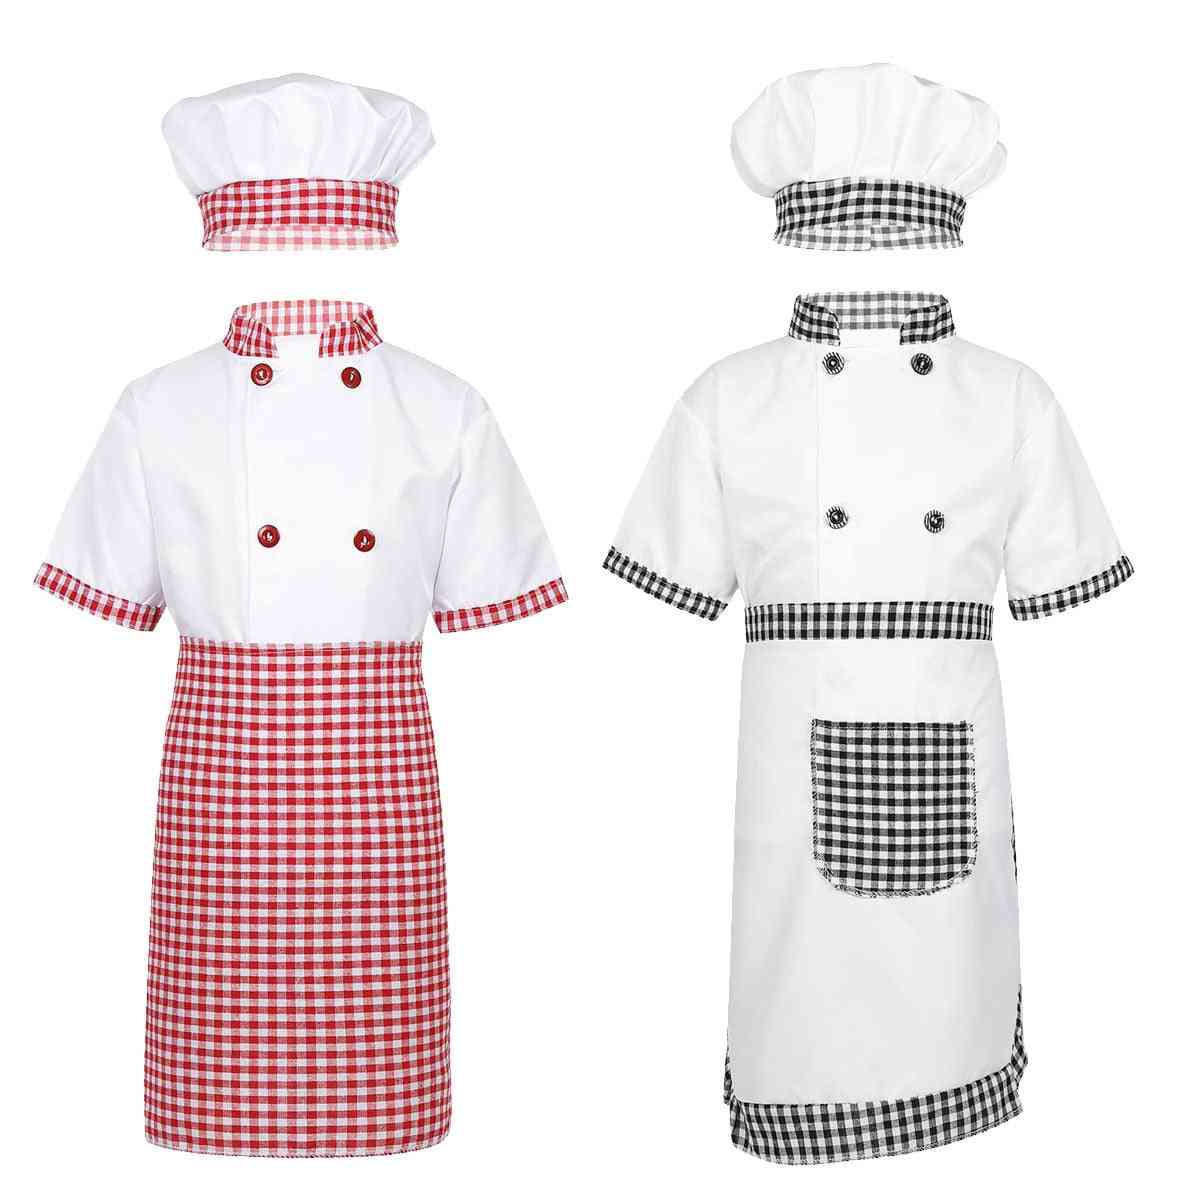 Chef Jacket With Apron Hat, Kitchen Cook Cosplay, Halloween Costume Set